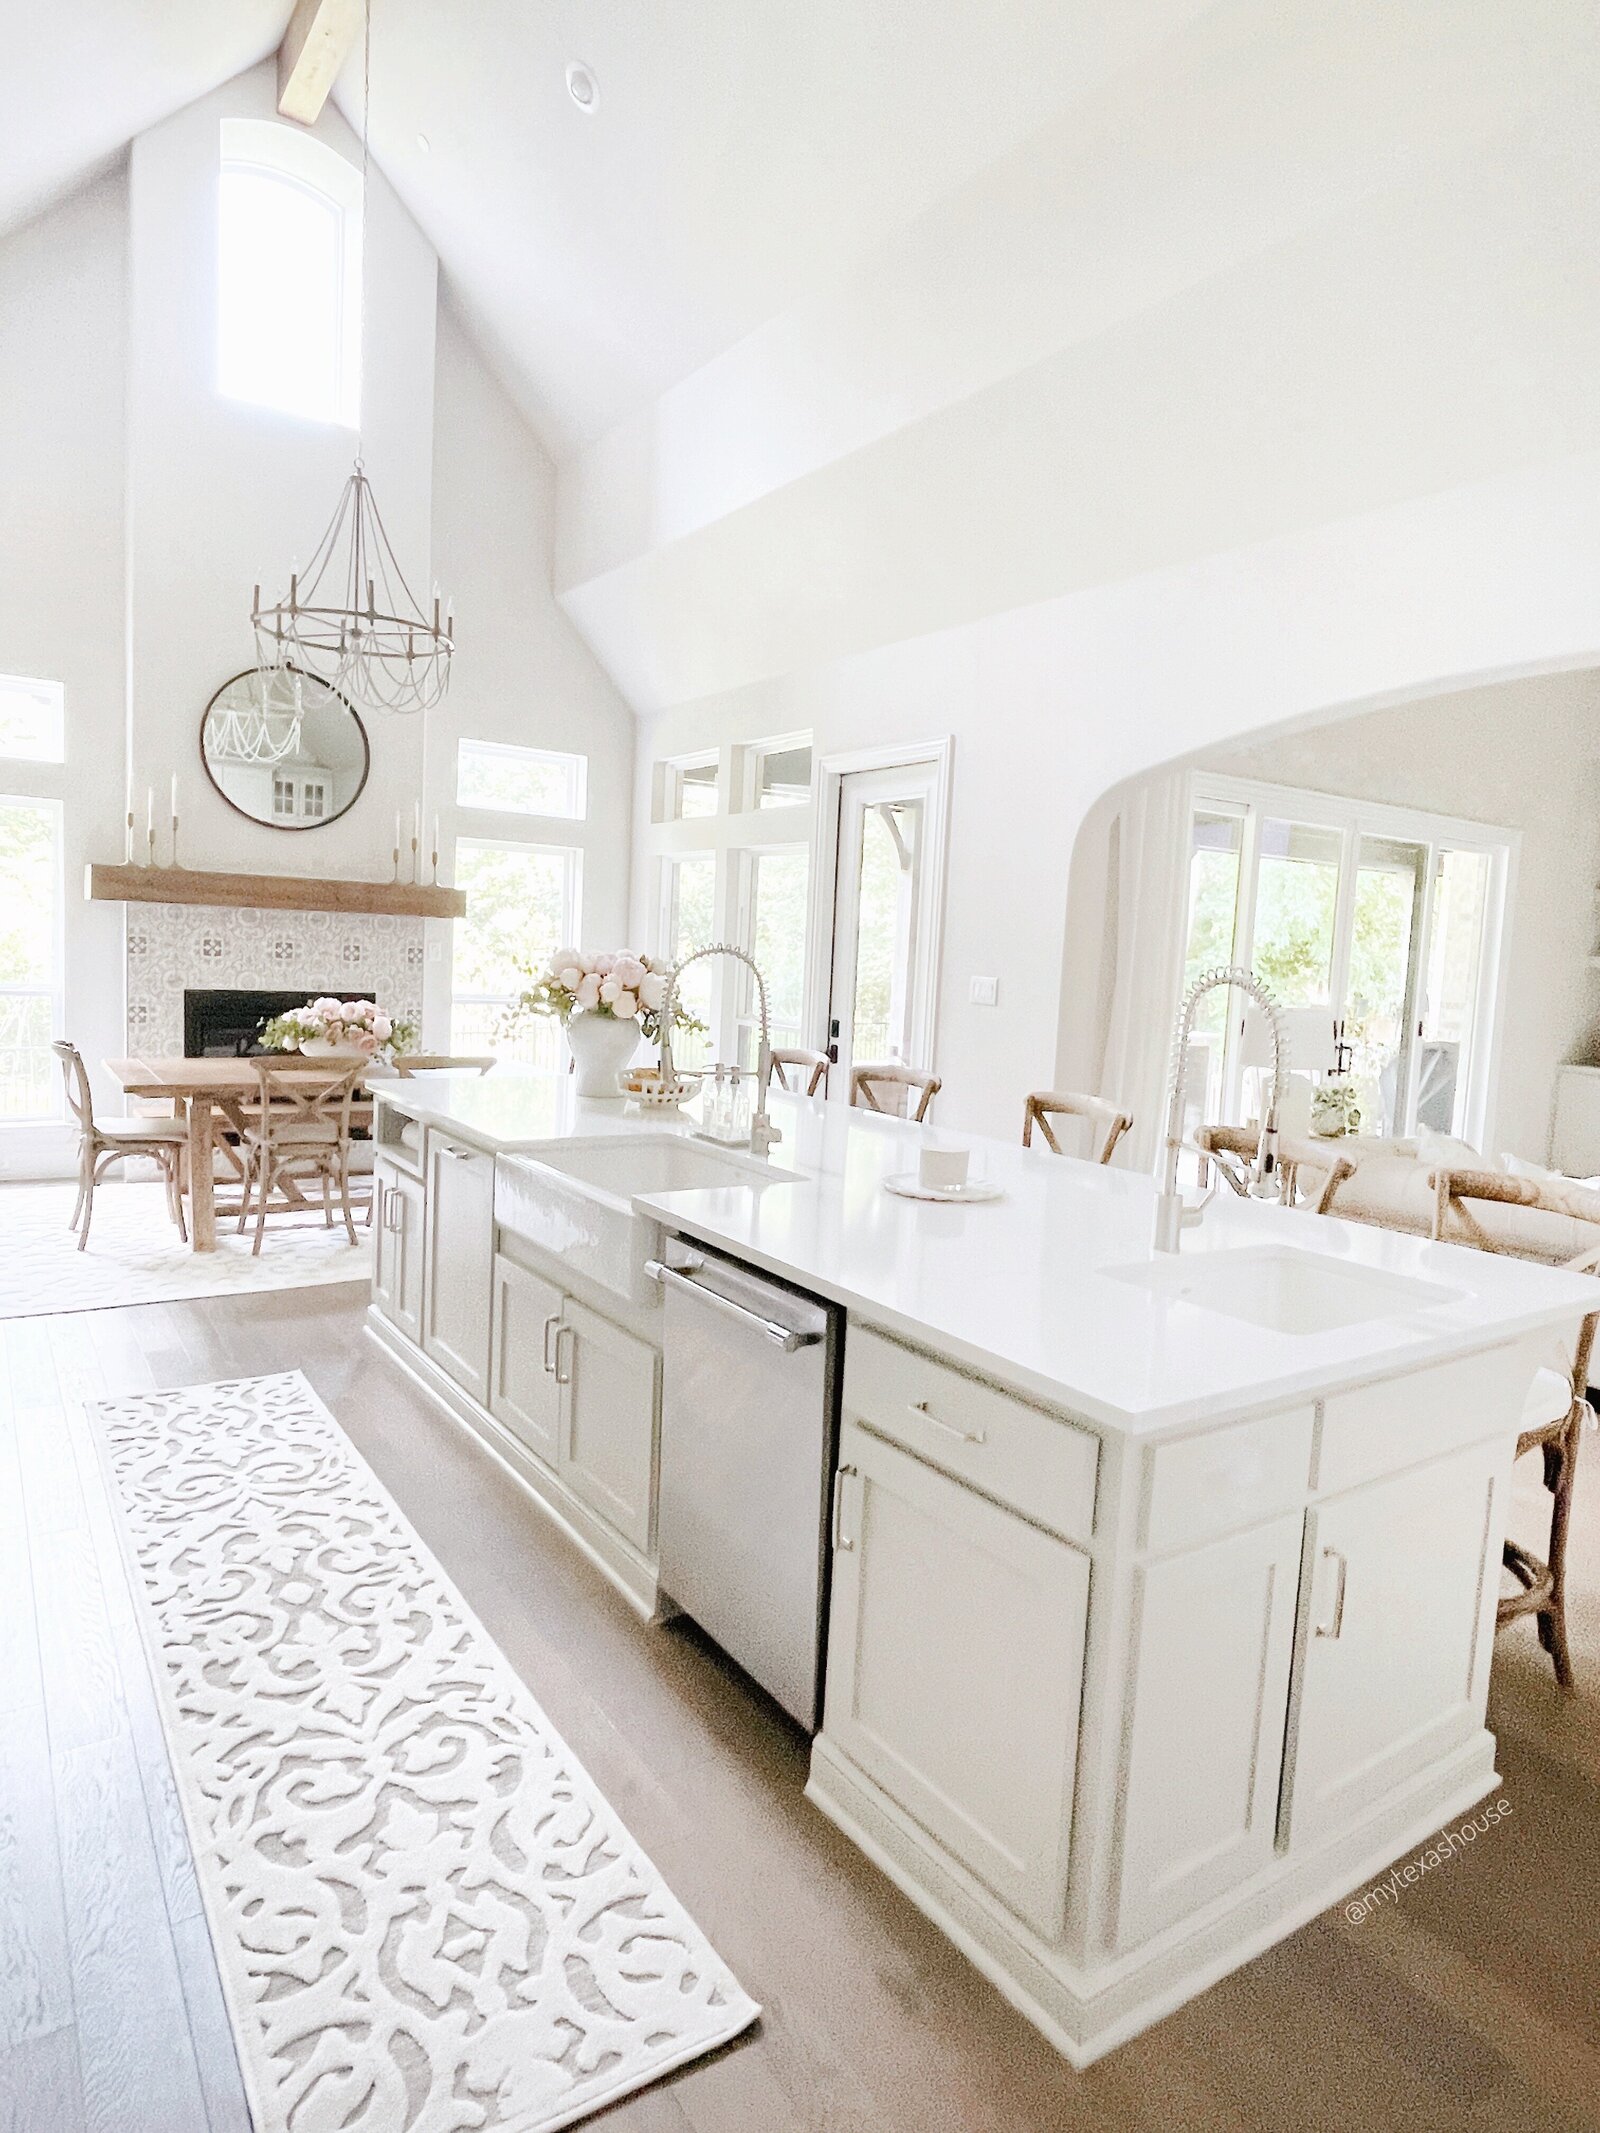 Kitchen space focused on the island featuring a MTH runner